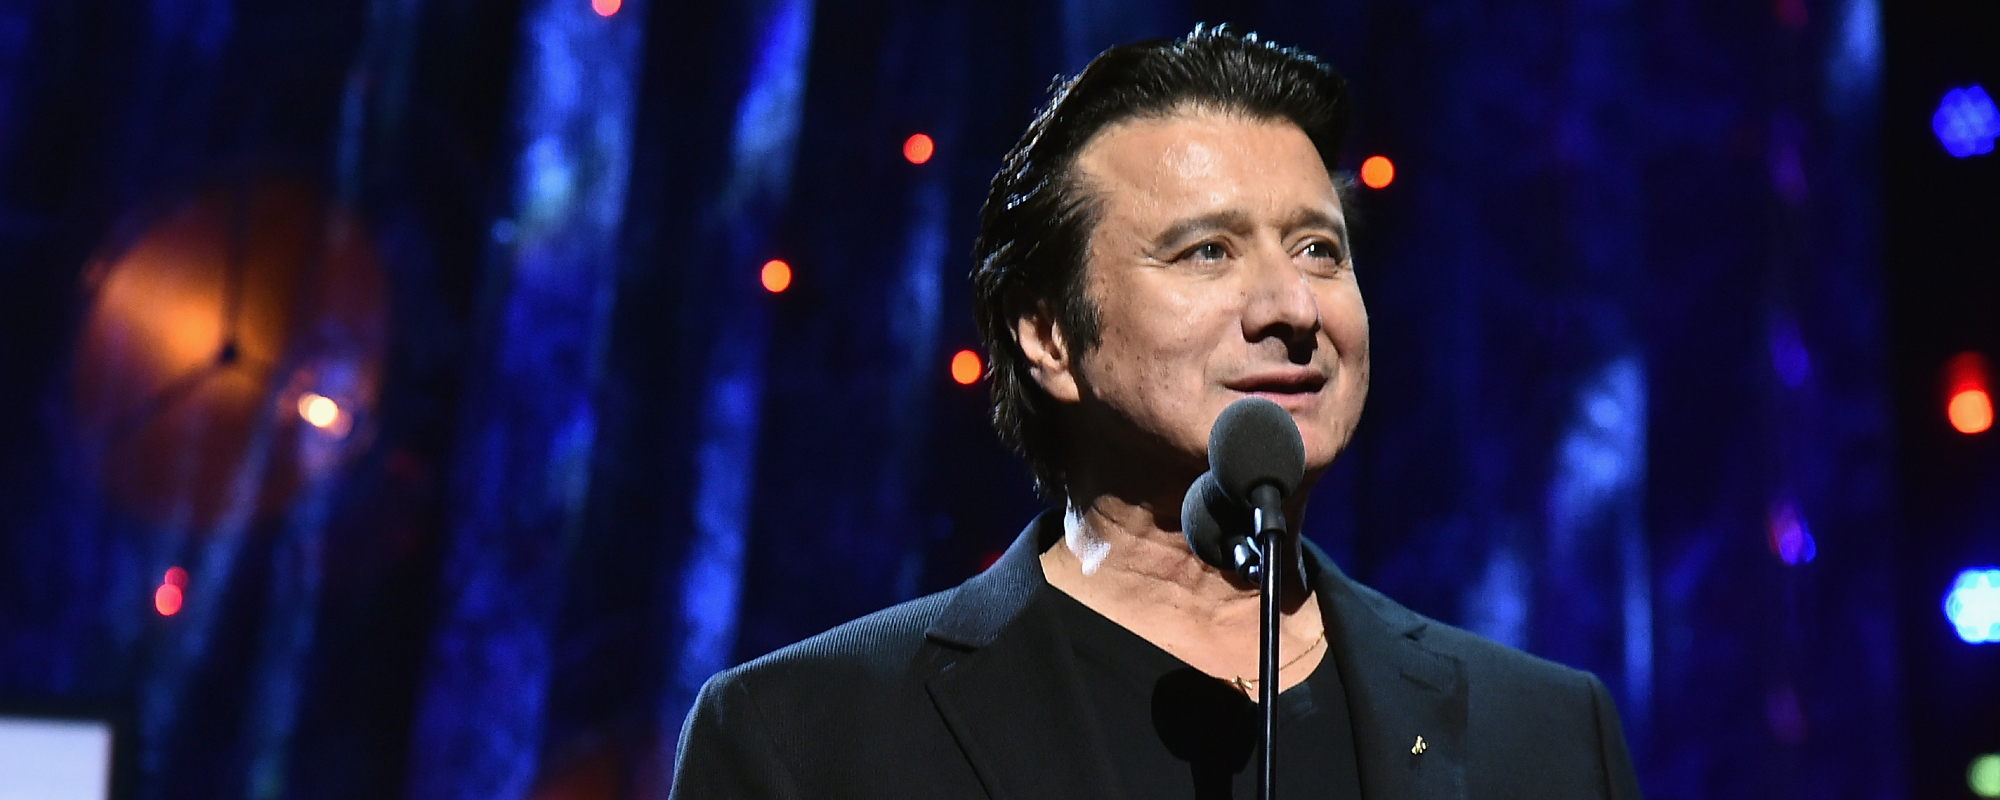 Former Journey Singer Steve Perry Shocked by Recent "Don’t Stop Believin" Milestone